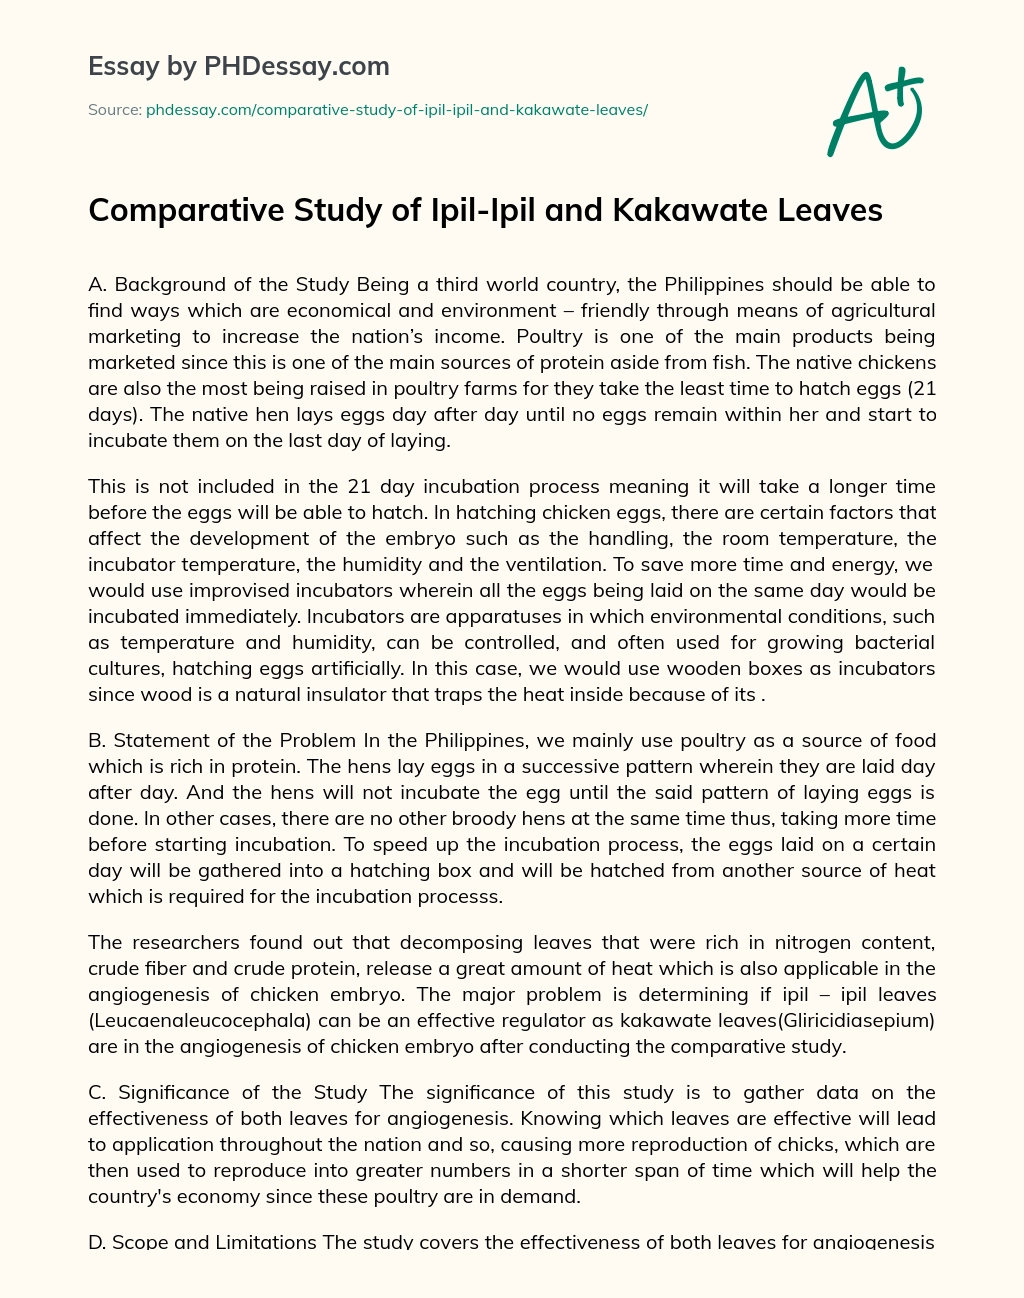 Comparative Study of Ipil-Ipil and Kakawate Leaves essay